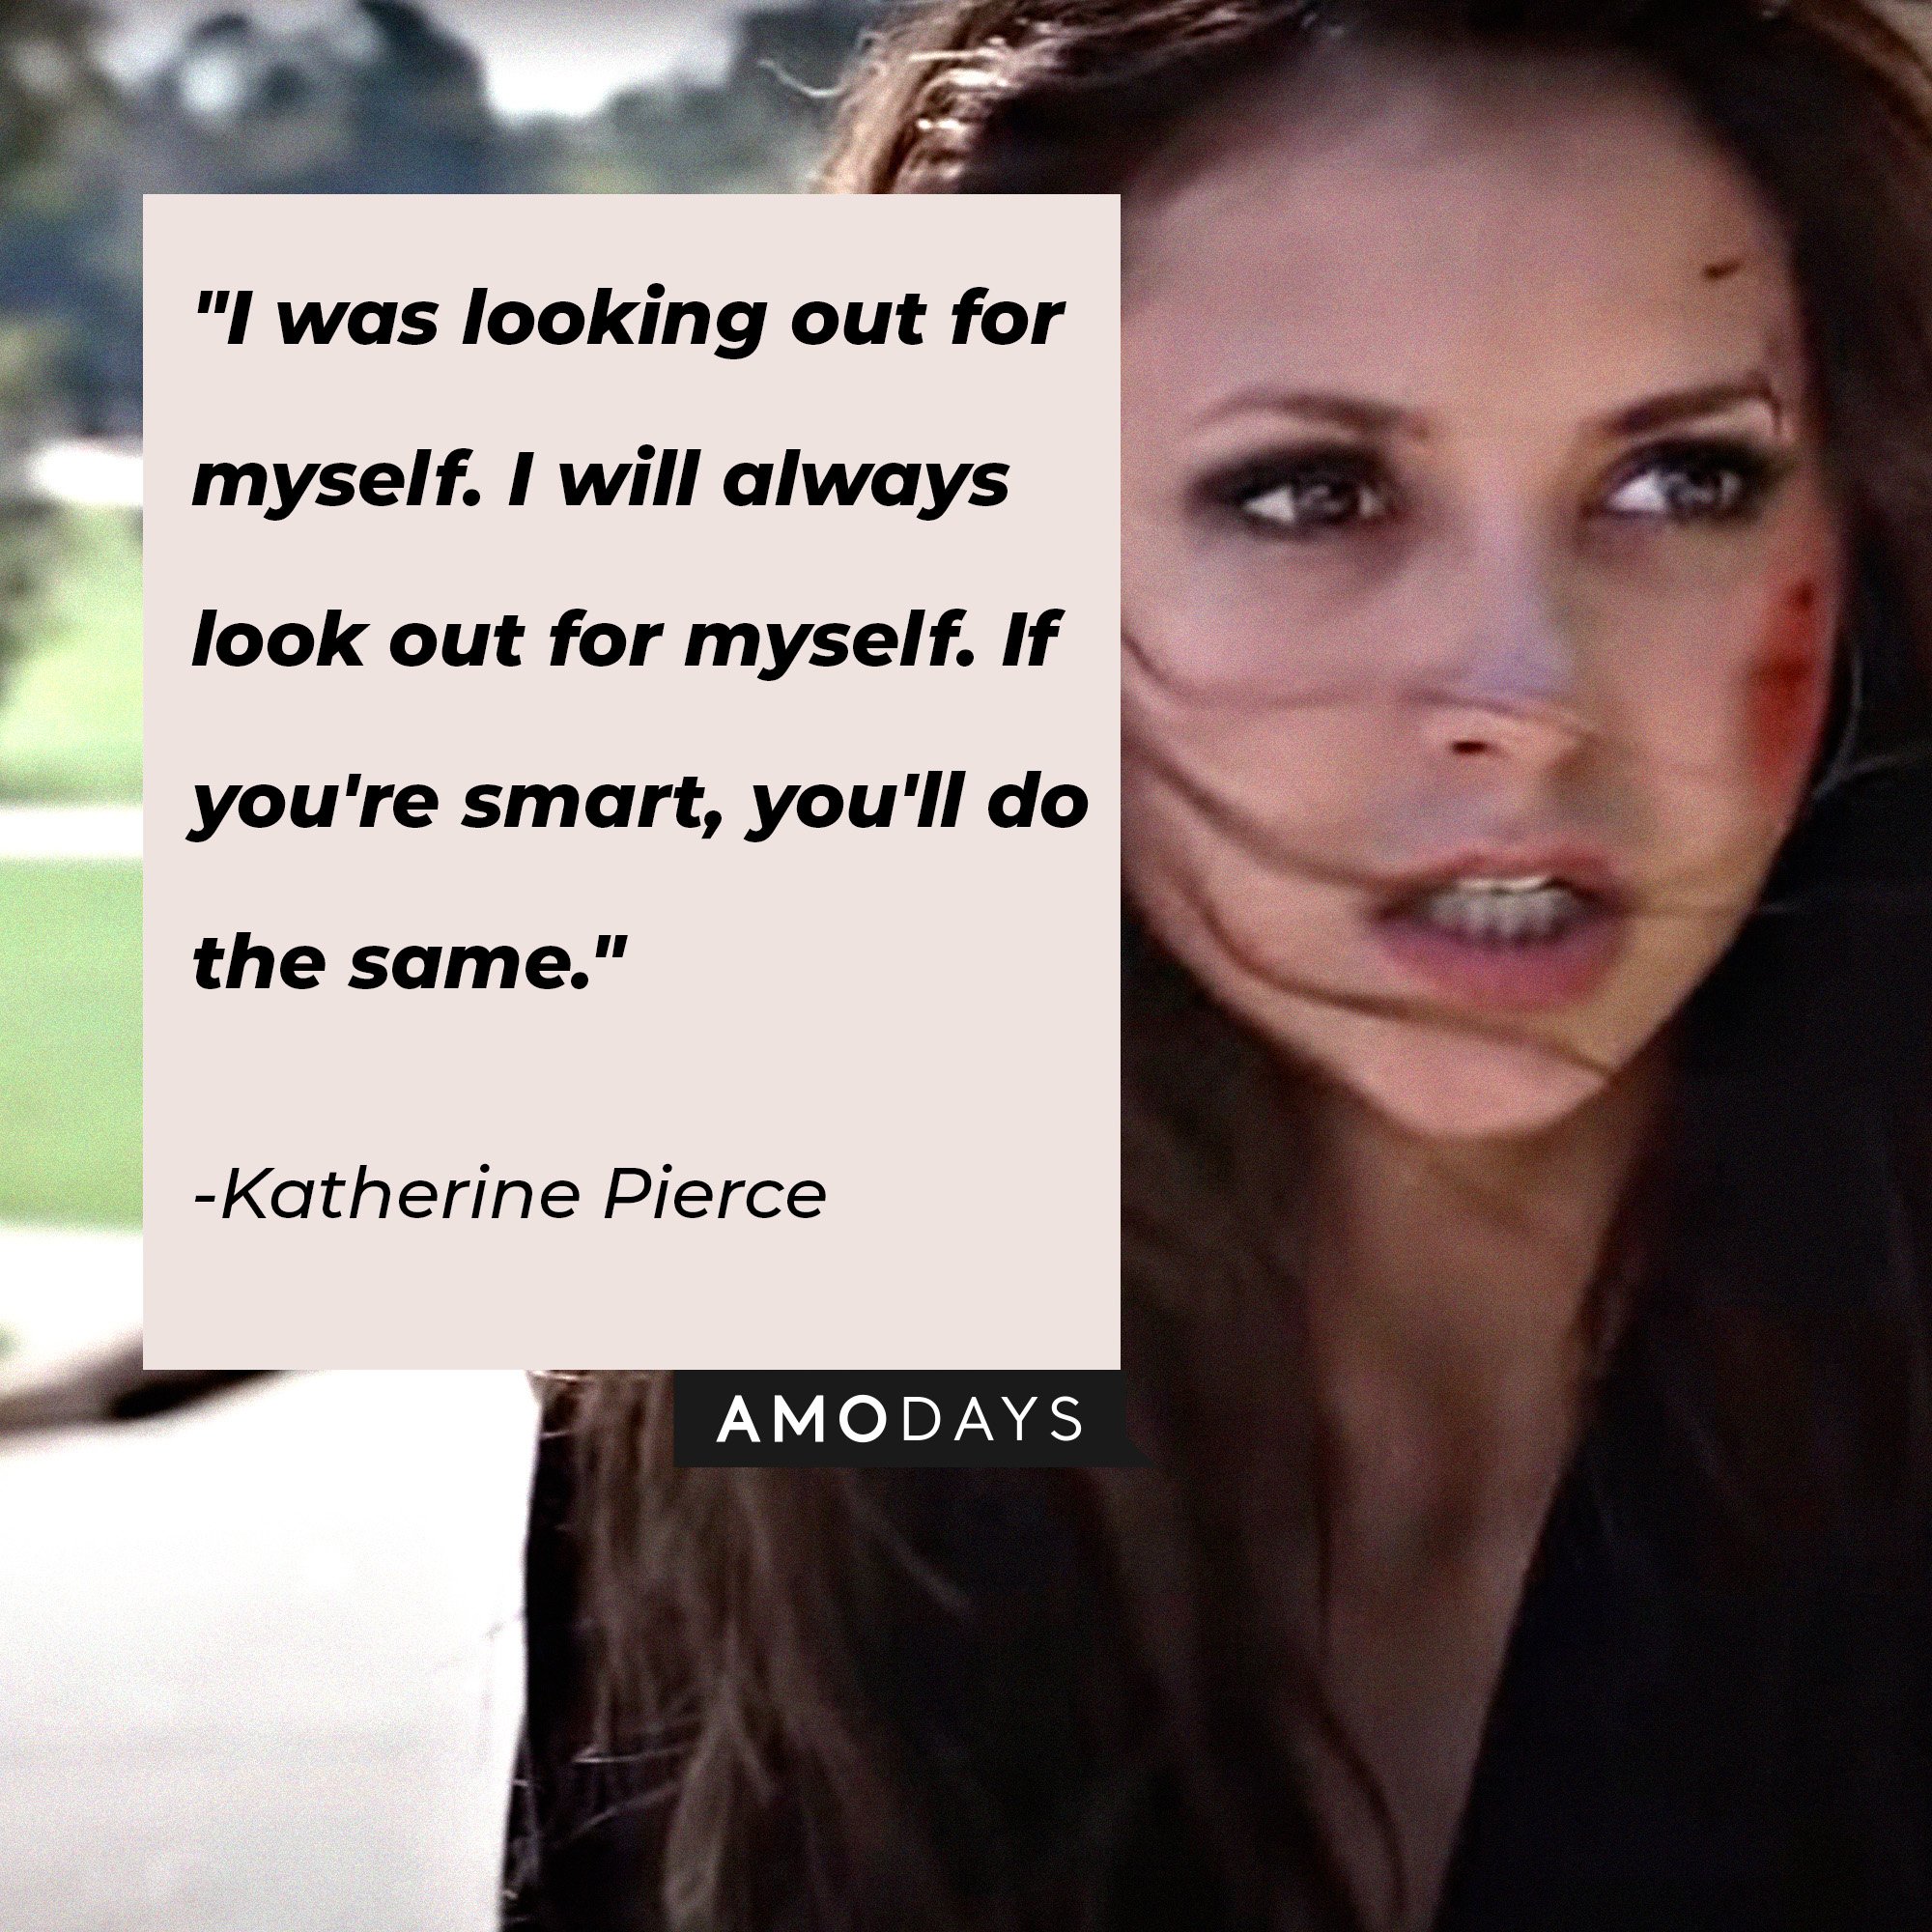 Katherine Pierce's quote: "I was looking out for myself. I will always look out for myself. If you're smart, you'll do the same." | Image: AmoDays